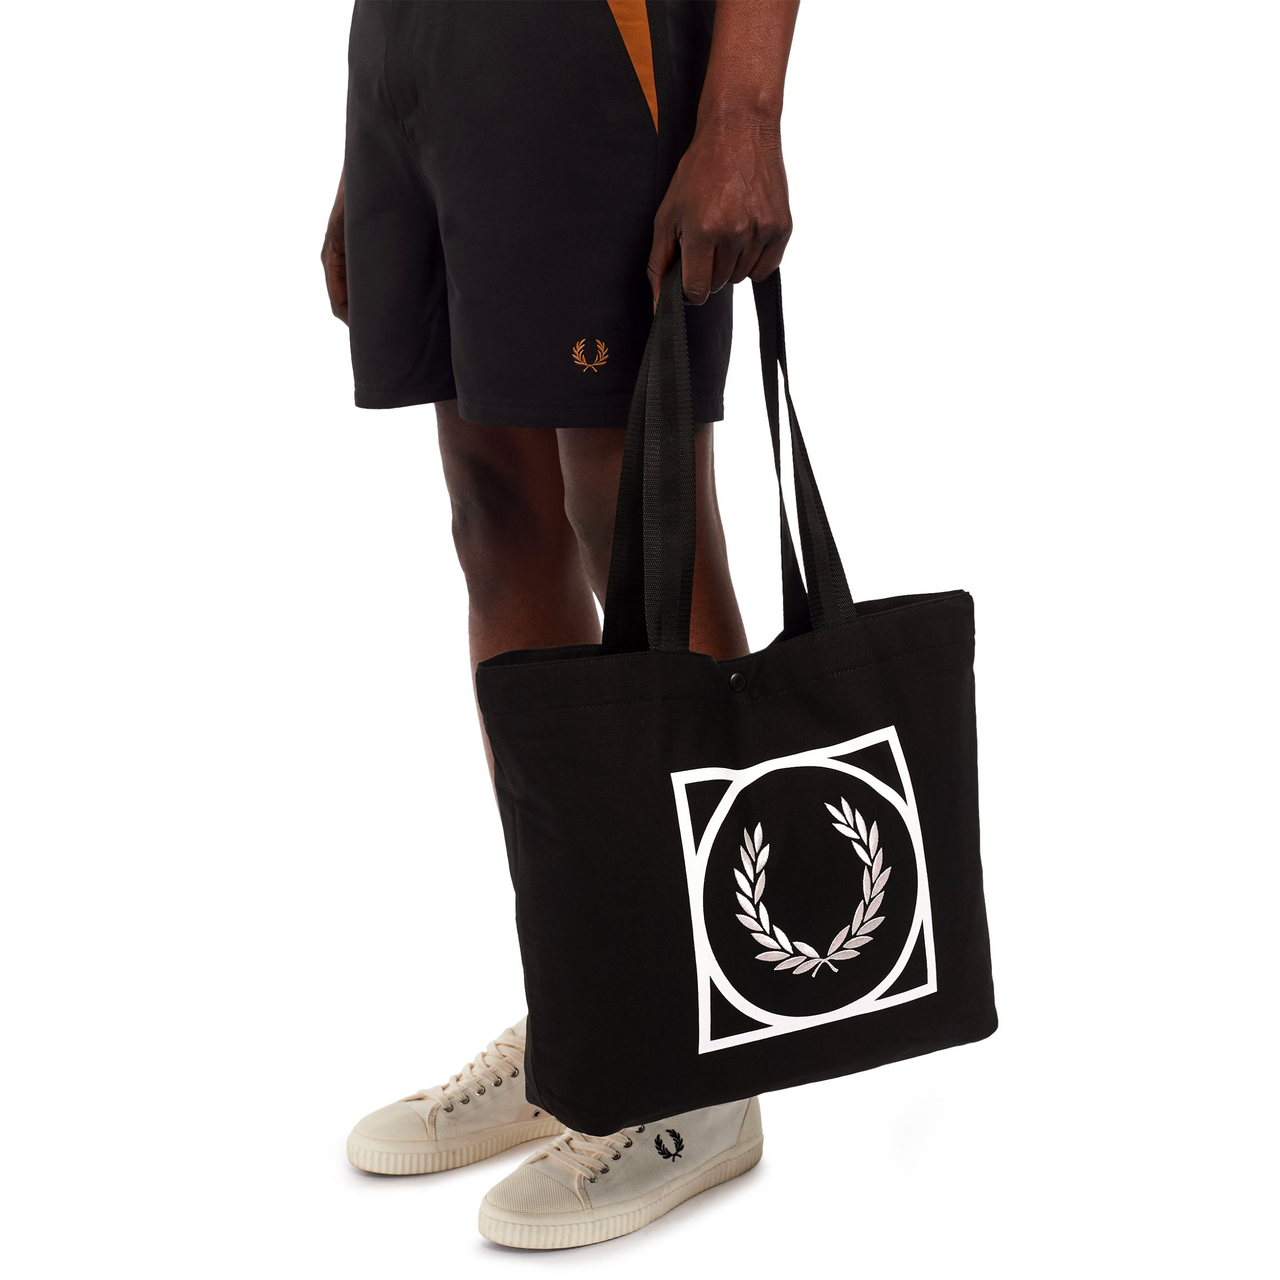 FRED PERRY LOGO GRAPHIC PRINT TOTE